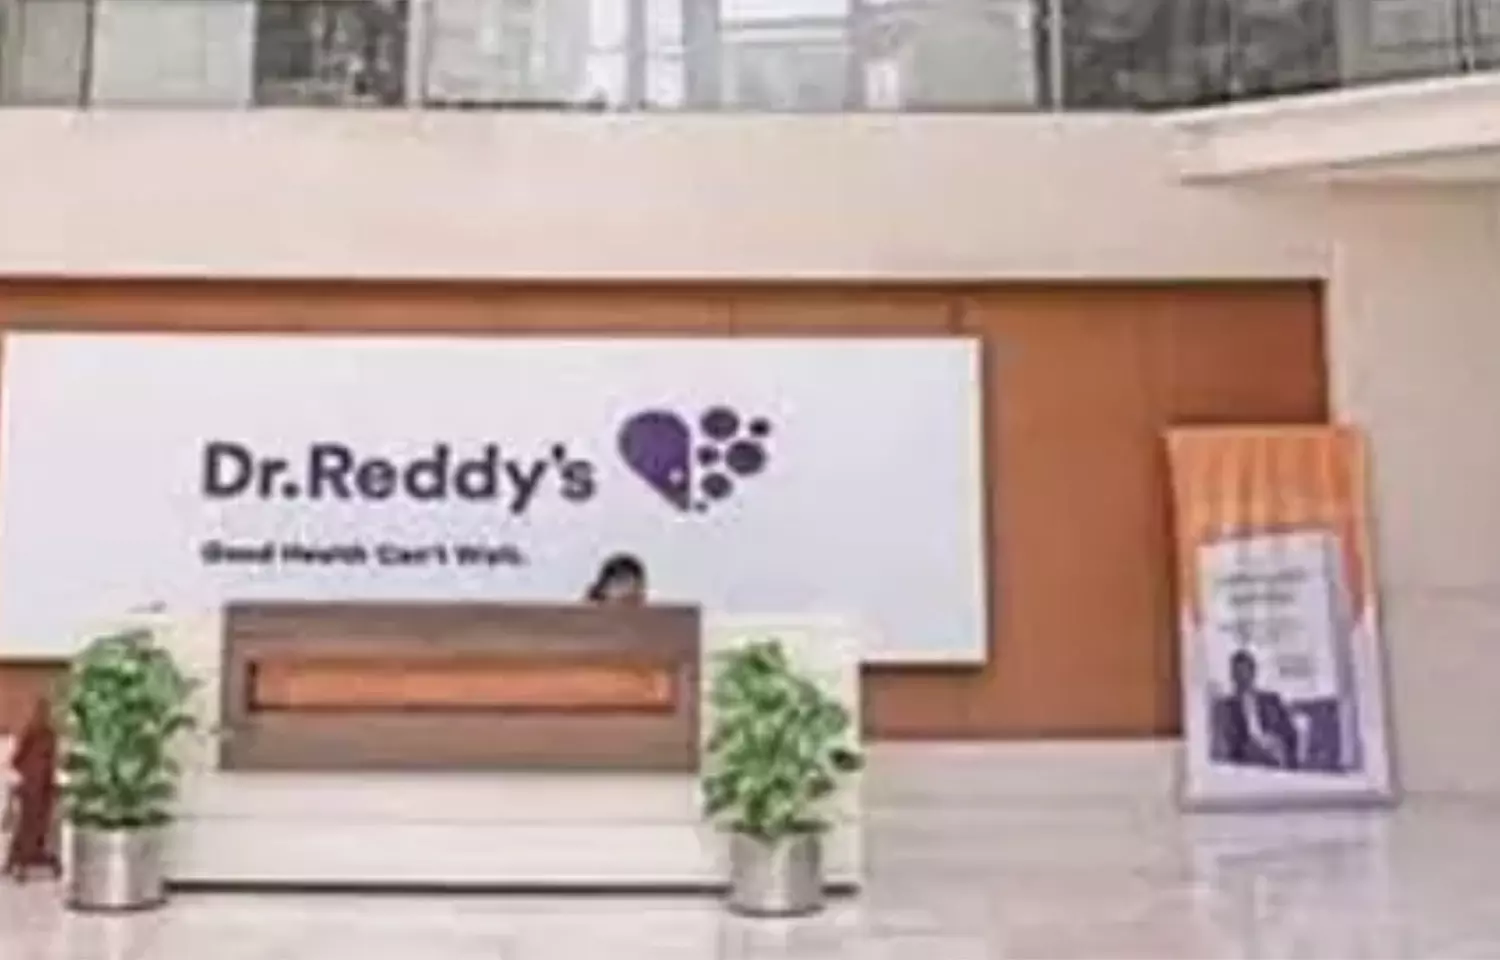 Dr Reddys, Prestige BioPharma ink pact for Trastuzumab biosimilar commercialization in select countries